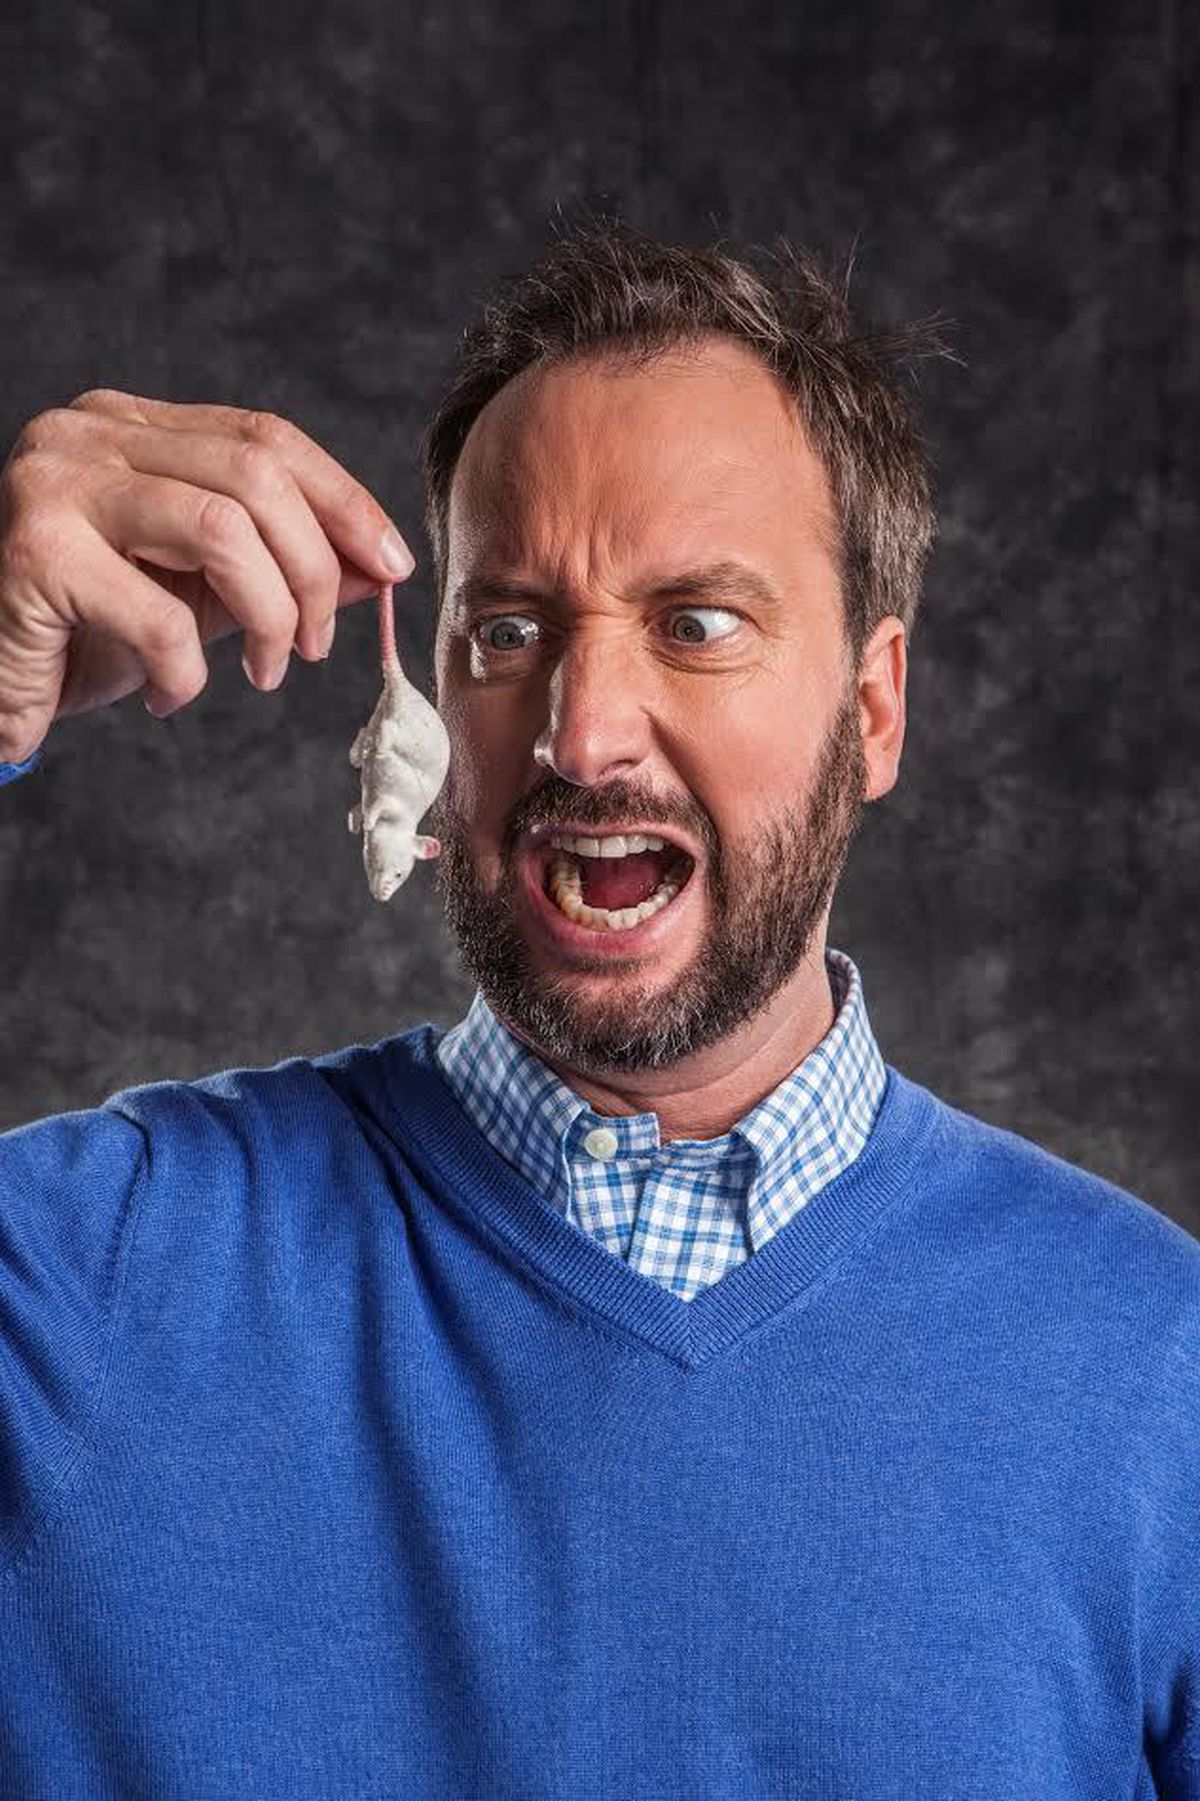 Tom Green speaks ahead of Birmingham show - and chats Donald Trump, new